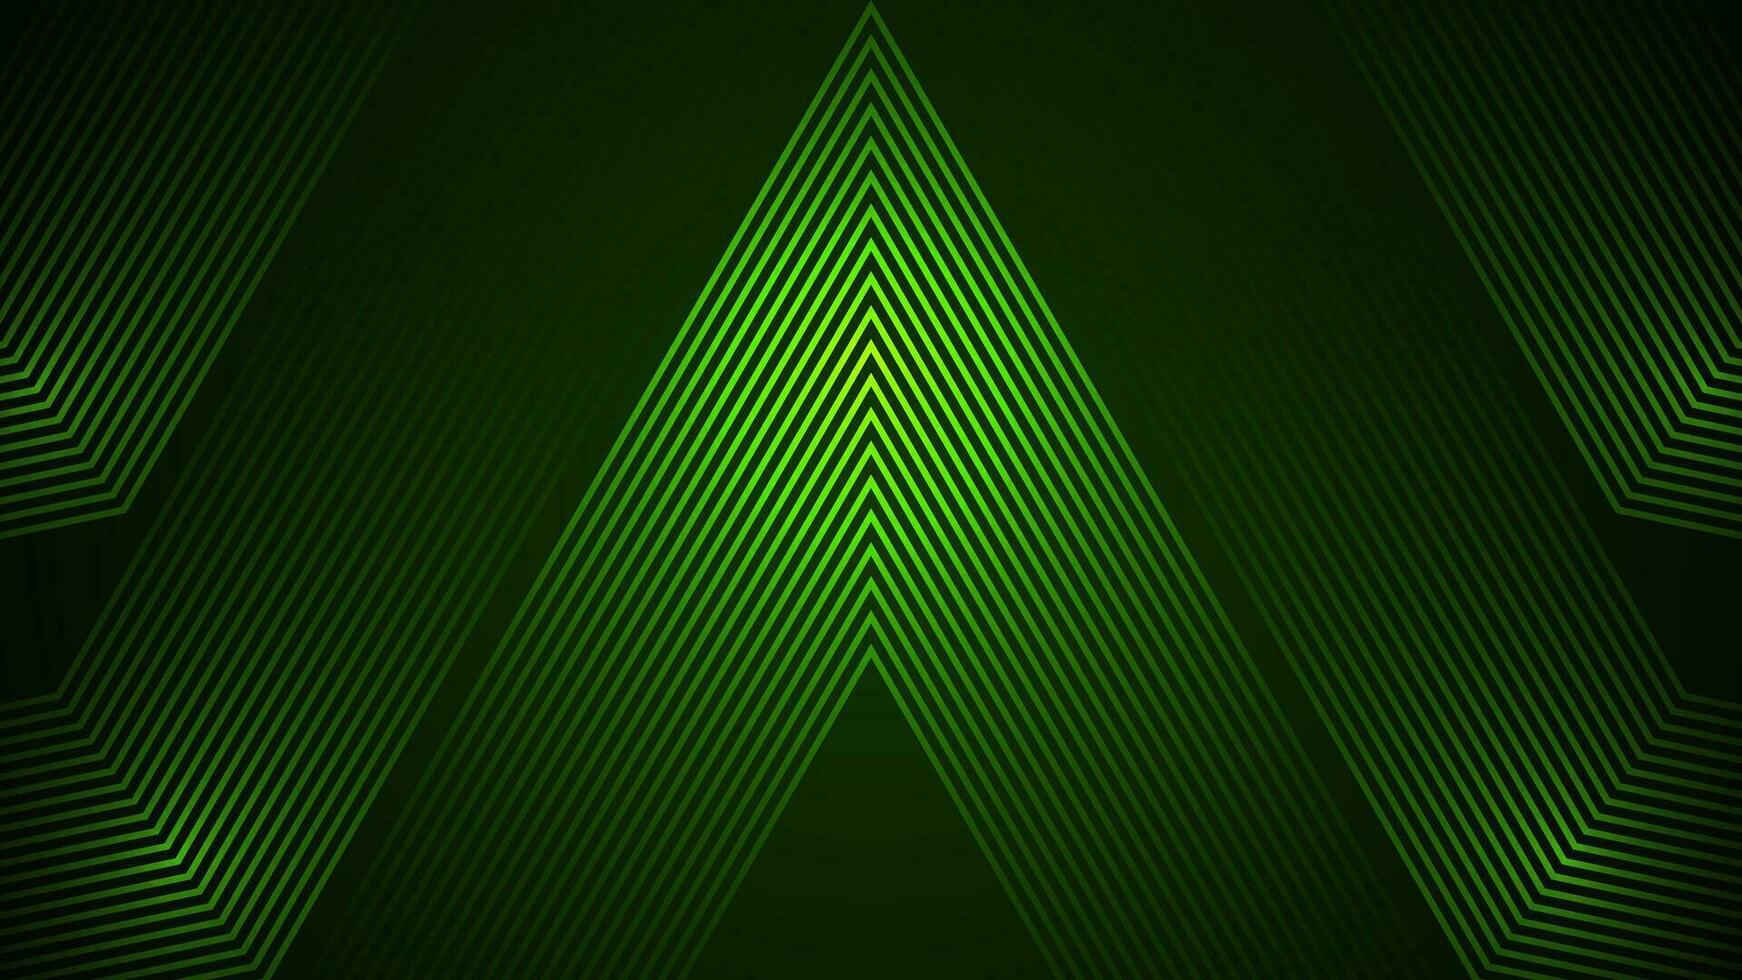 Dark green simple abstract background with lines in a geometric style as the main element. vector